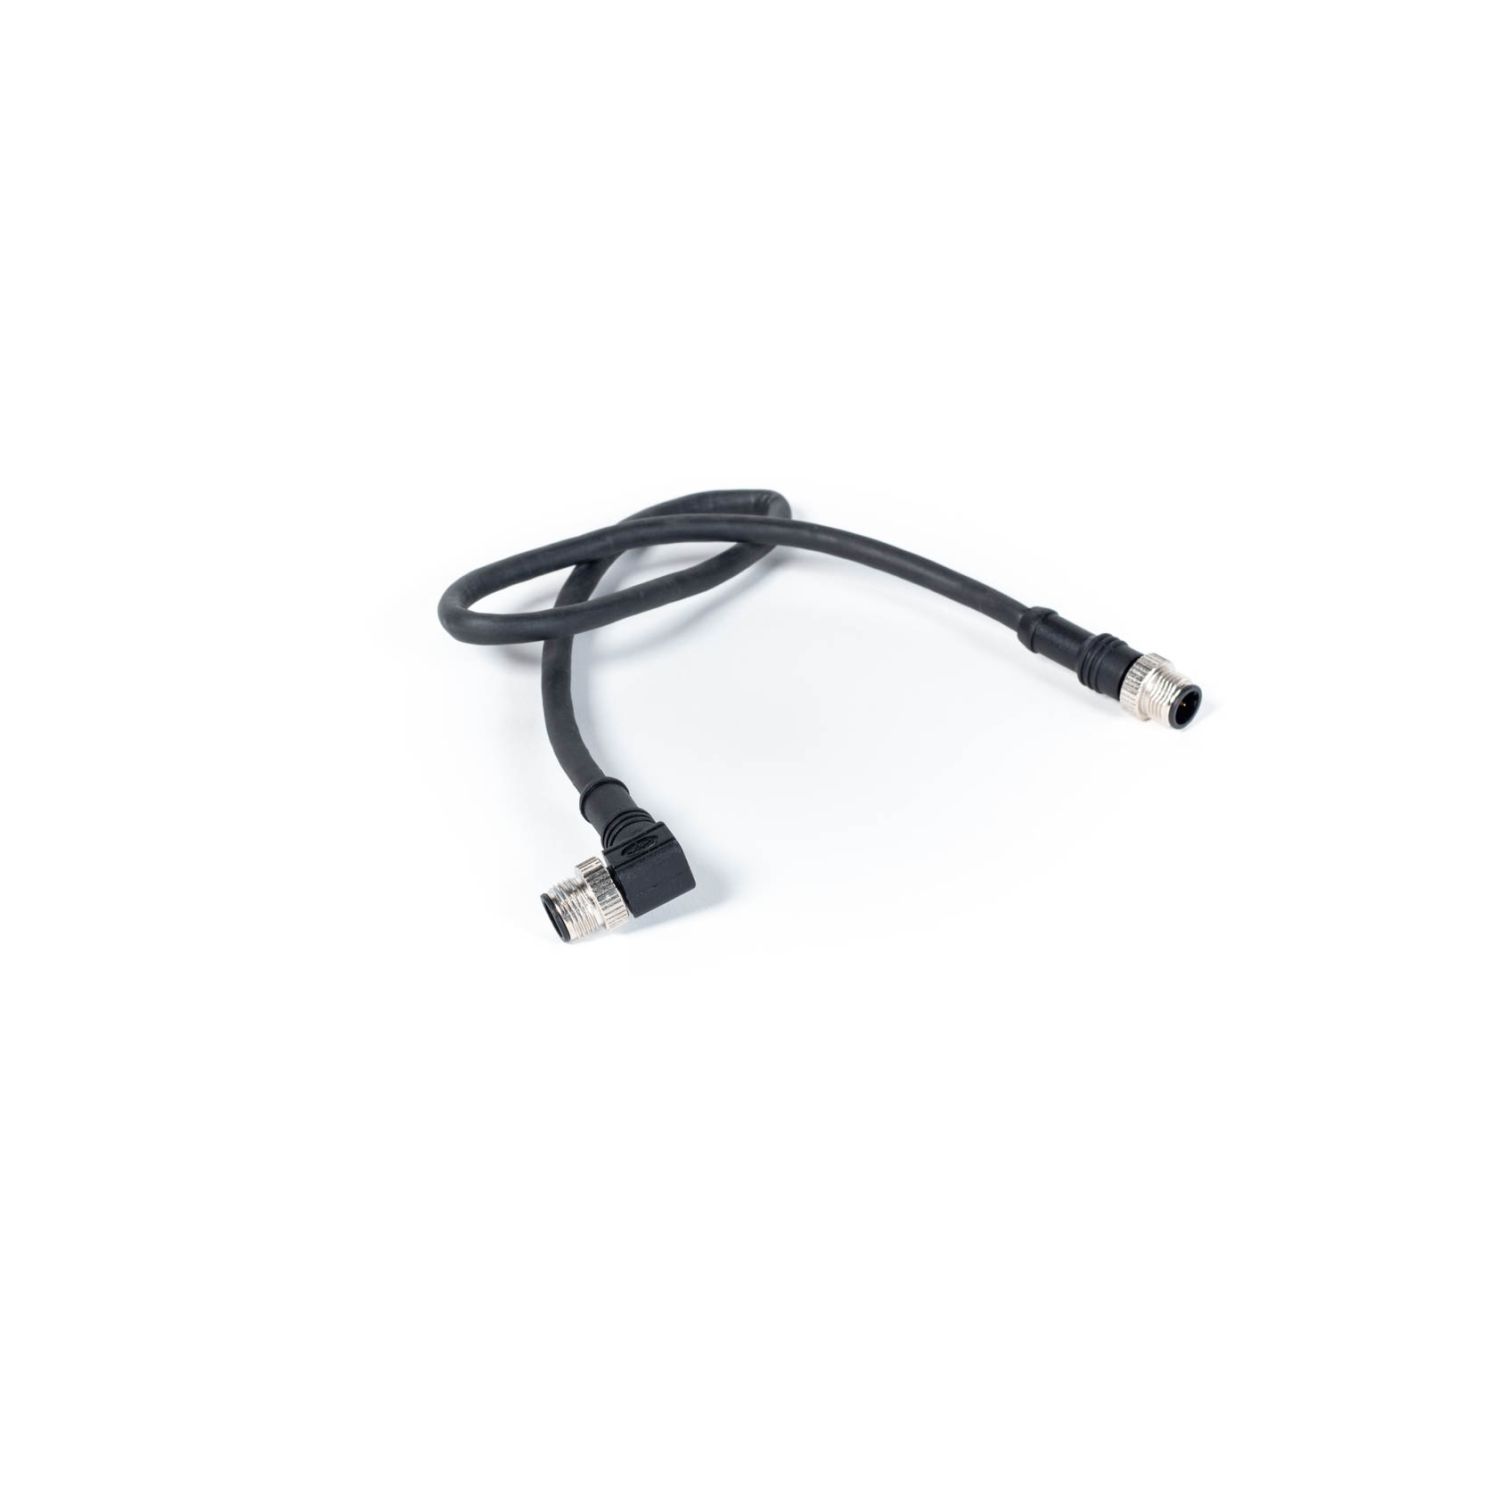 RE556567 Ethernet Cable Fits John Deere